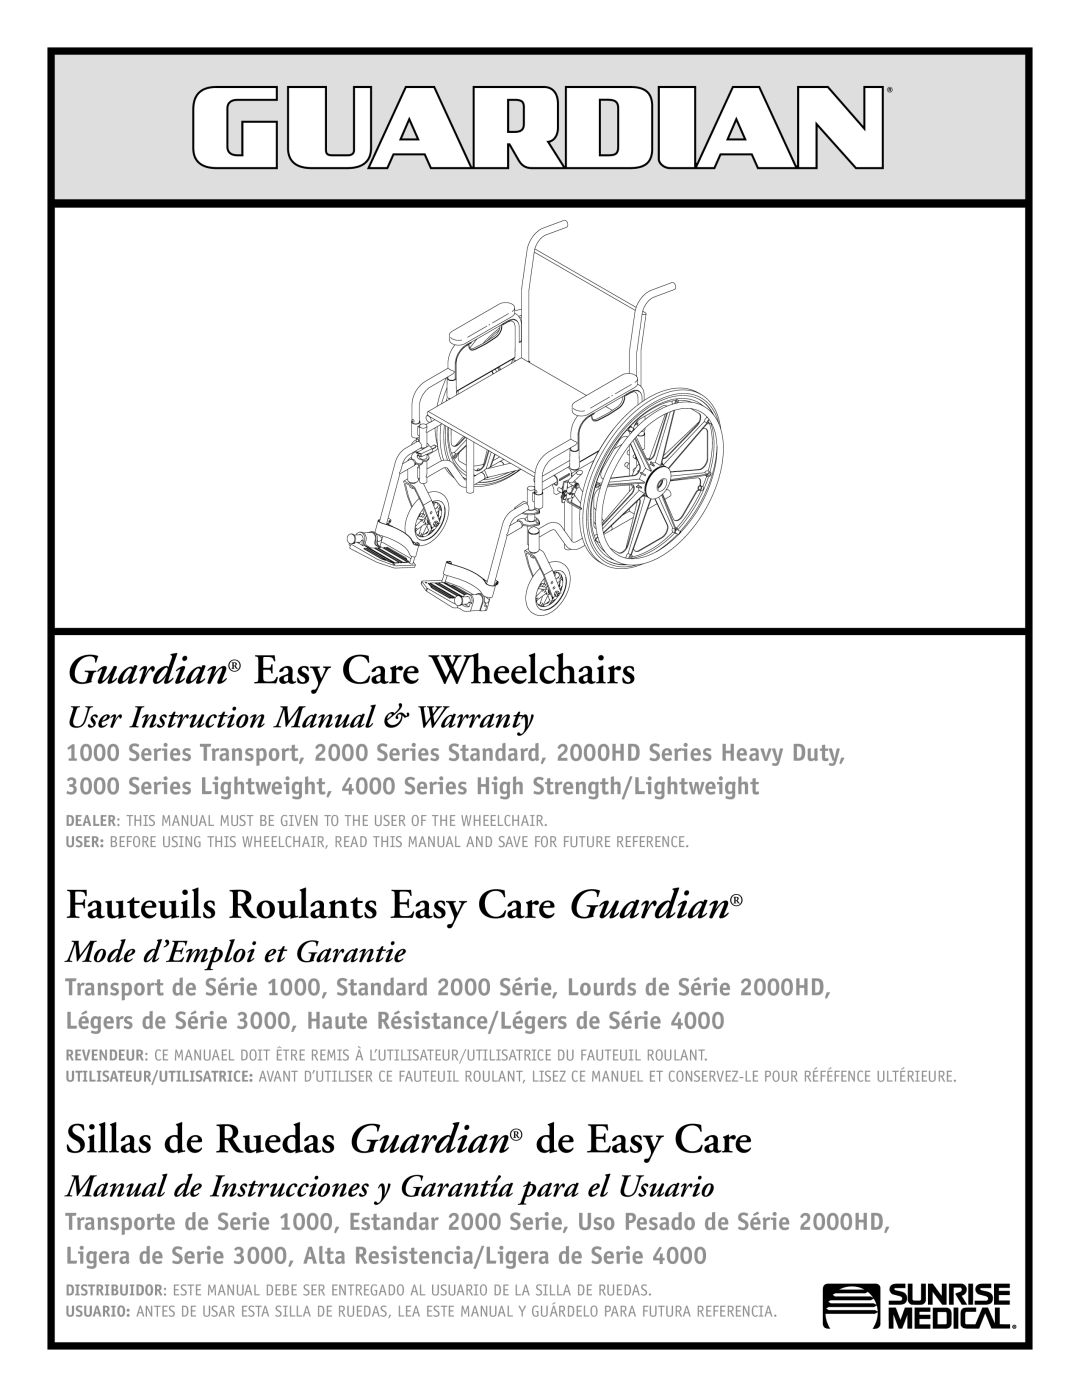 Sunrise Medical 4000 Series instruction manual Guardian Easy Care Wheelchairs, Fauteuils Roulants Easy Care Guardian 